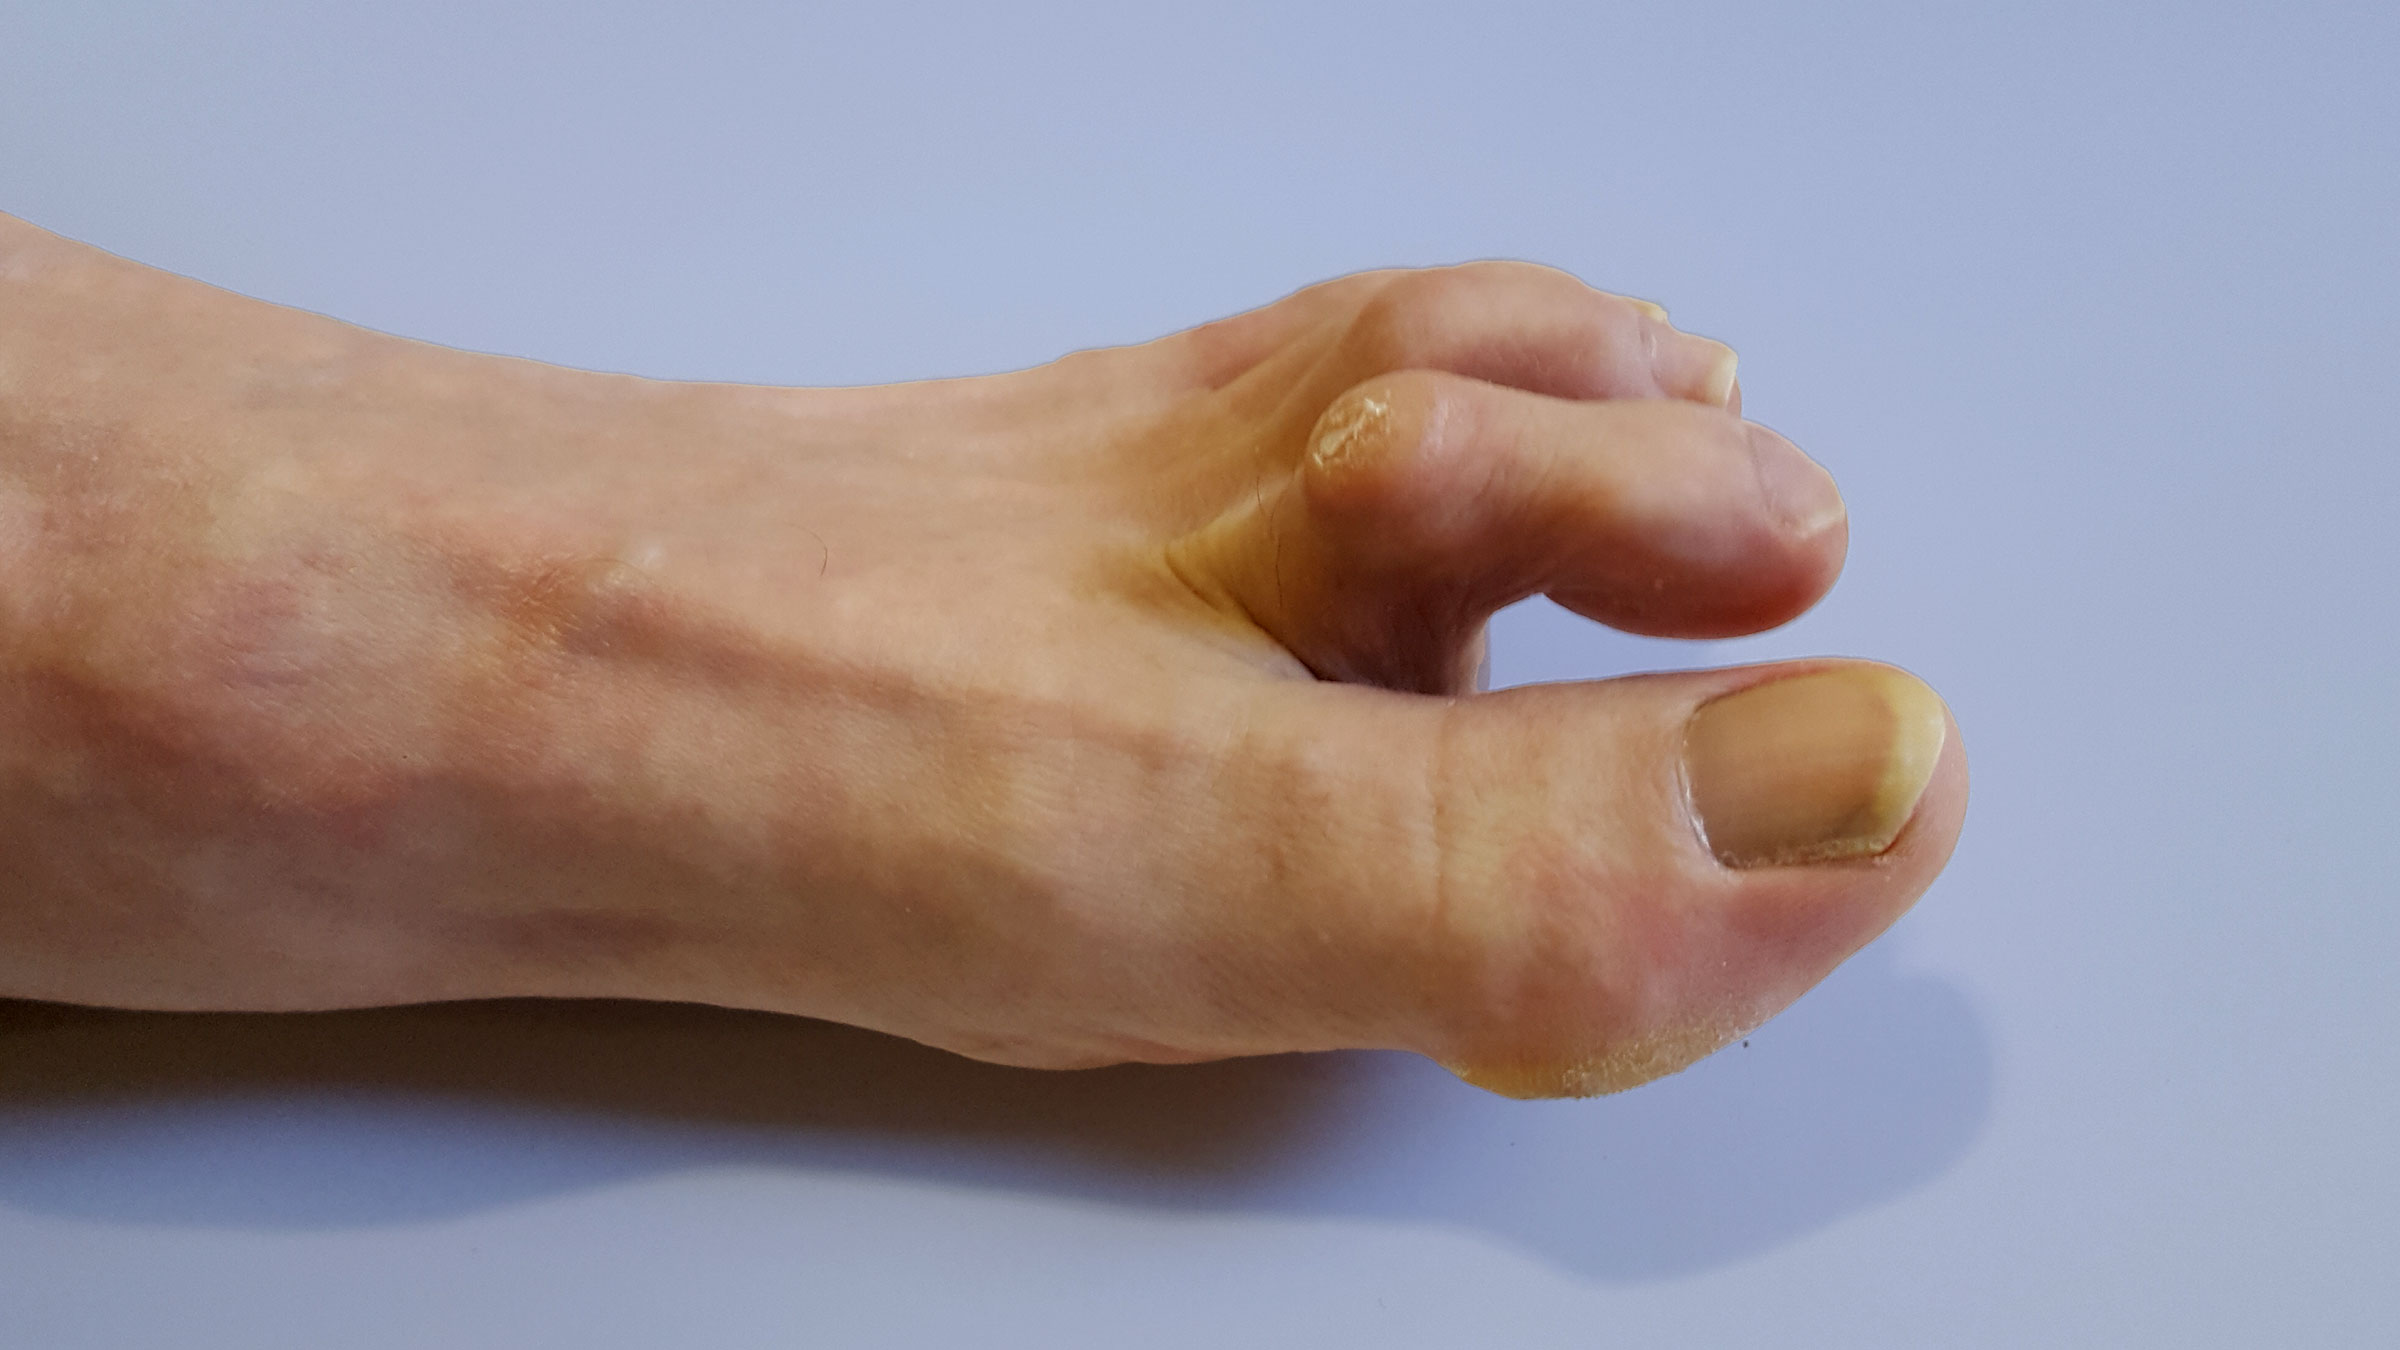 Signs and Symptoms of Claw Toes